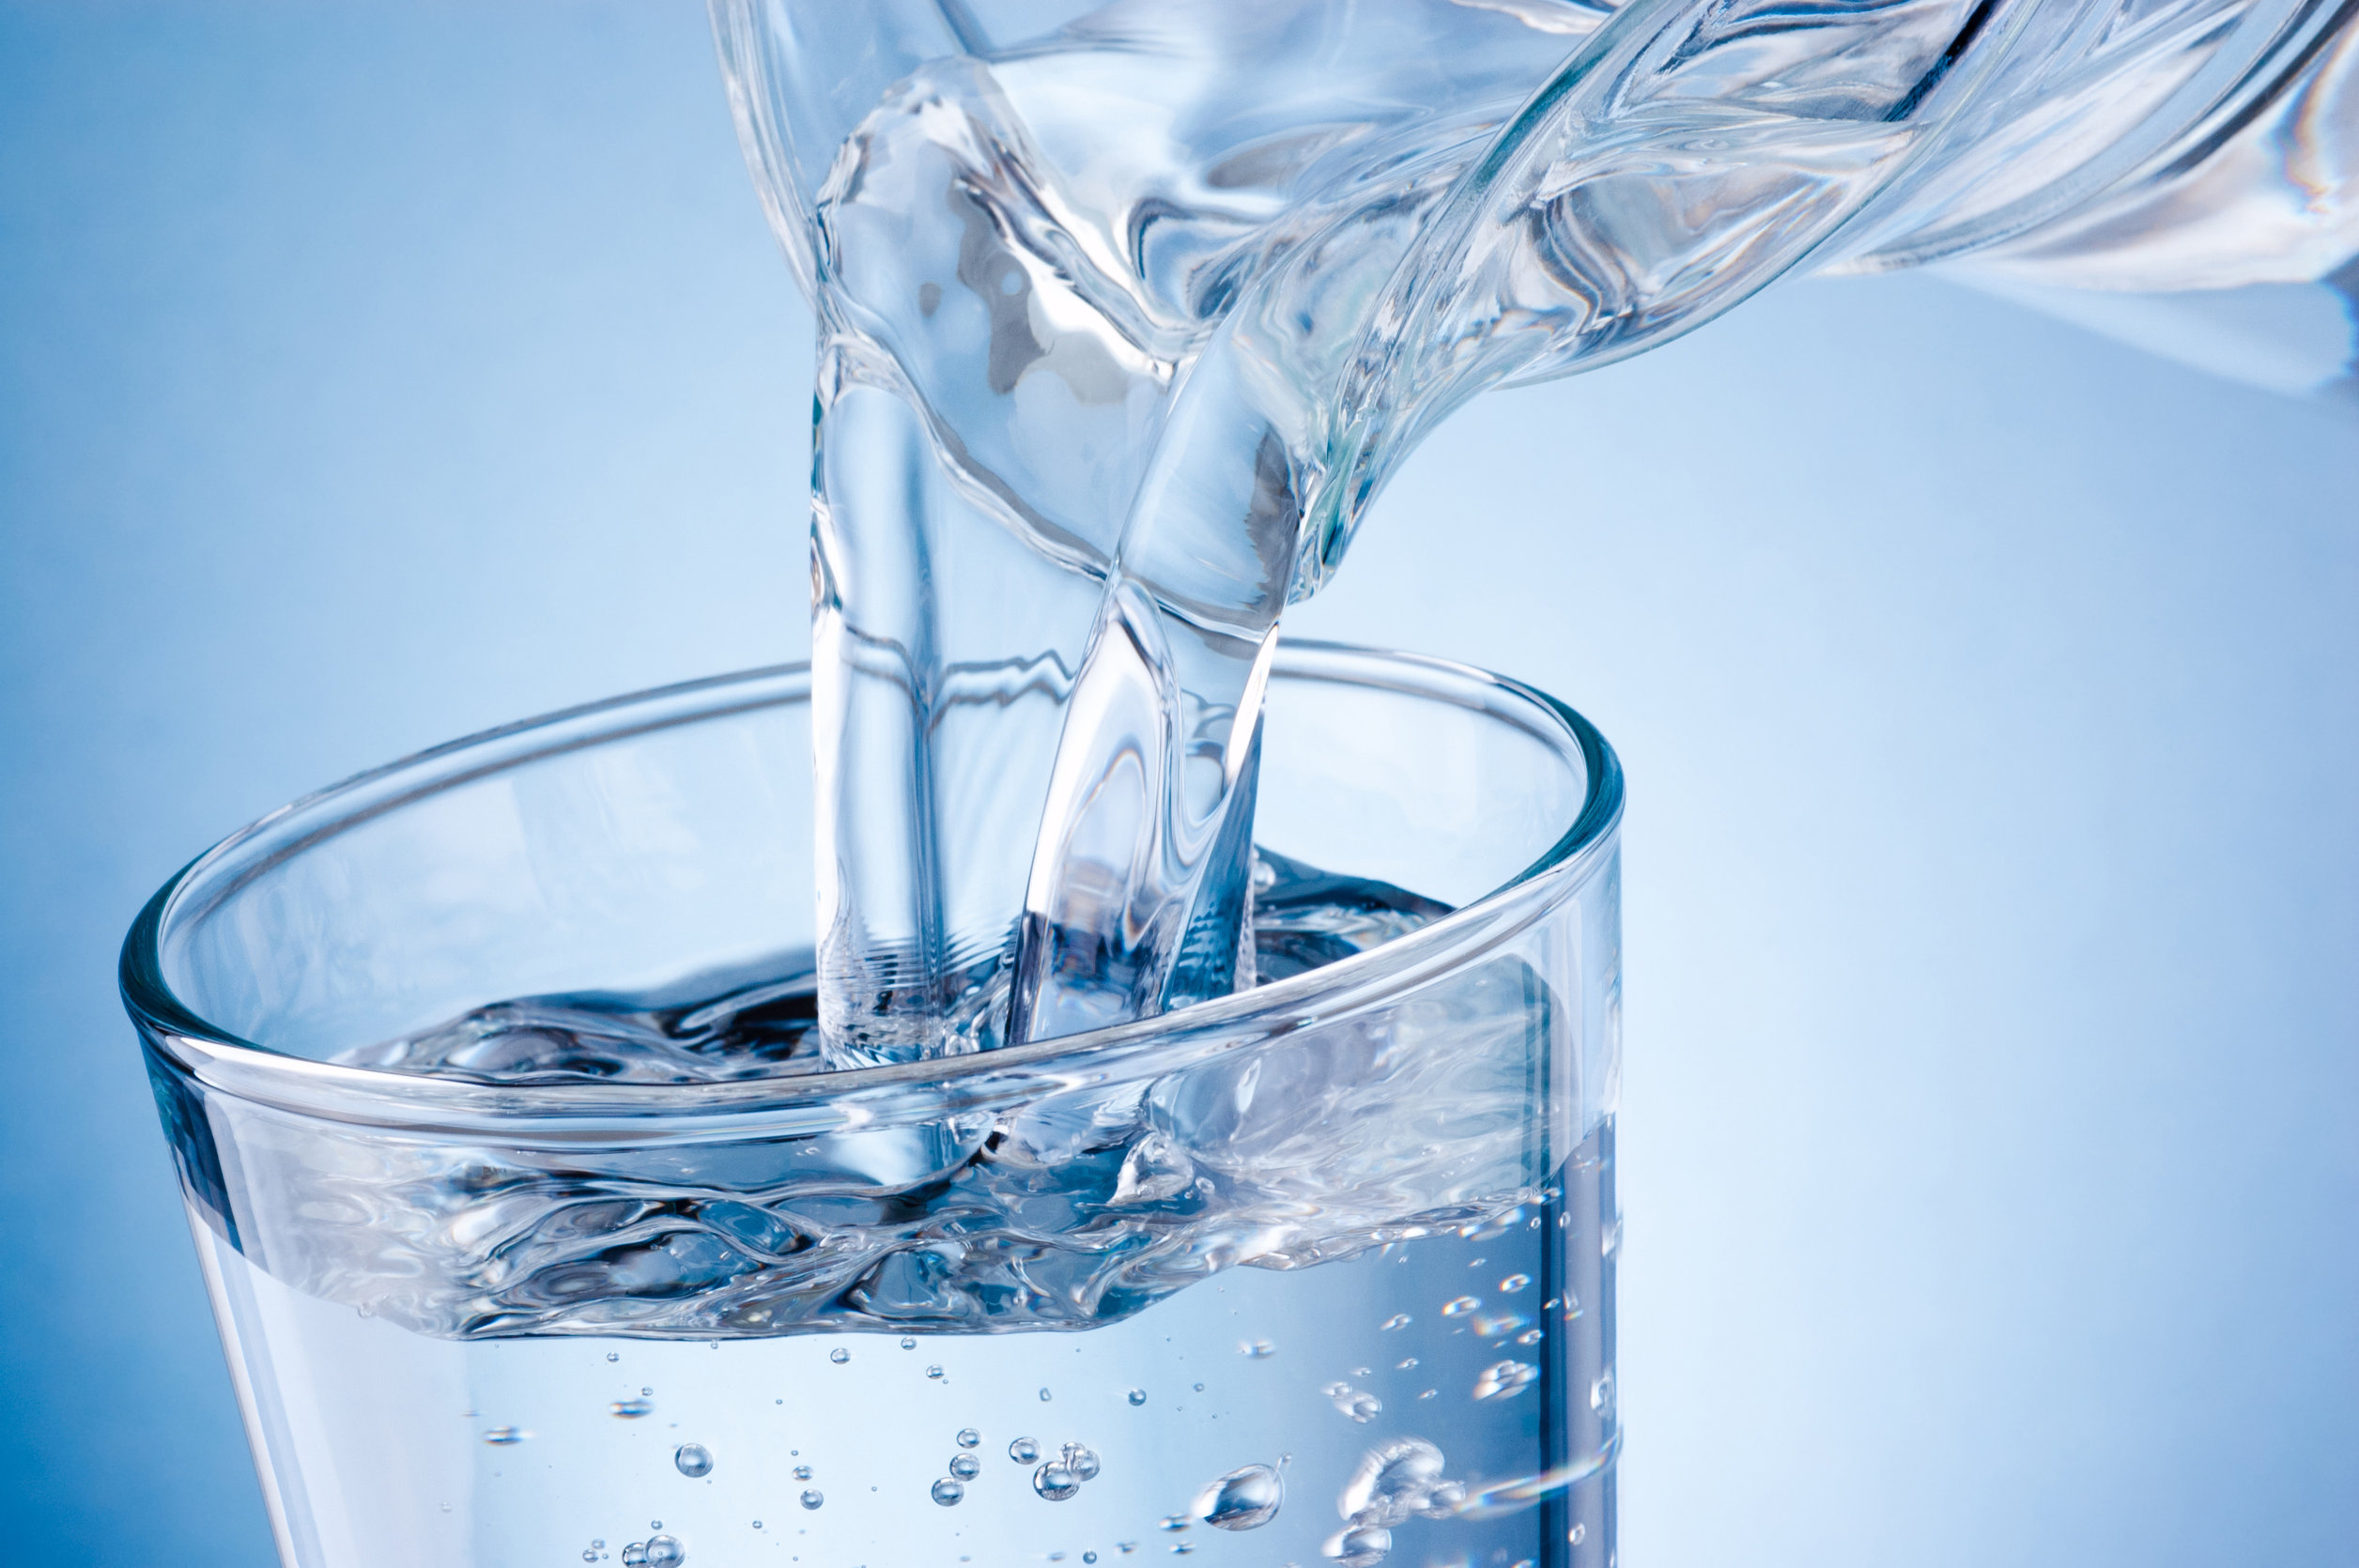 dehydration signs and symptoms